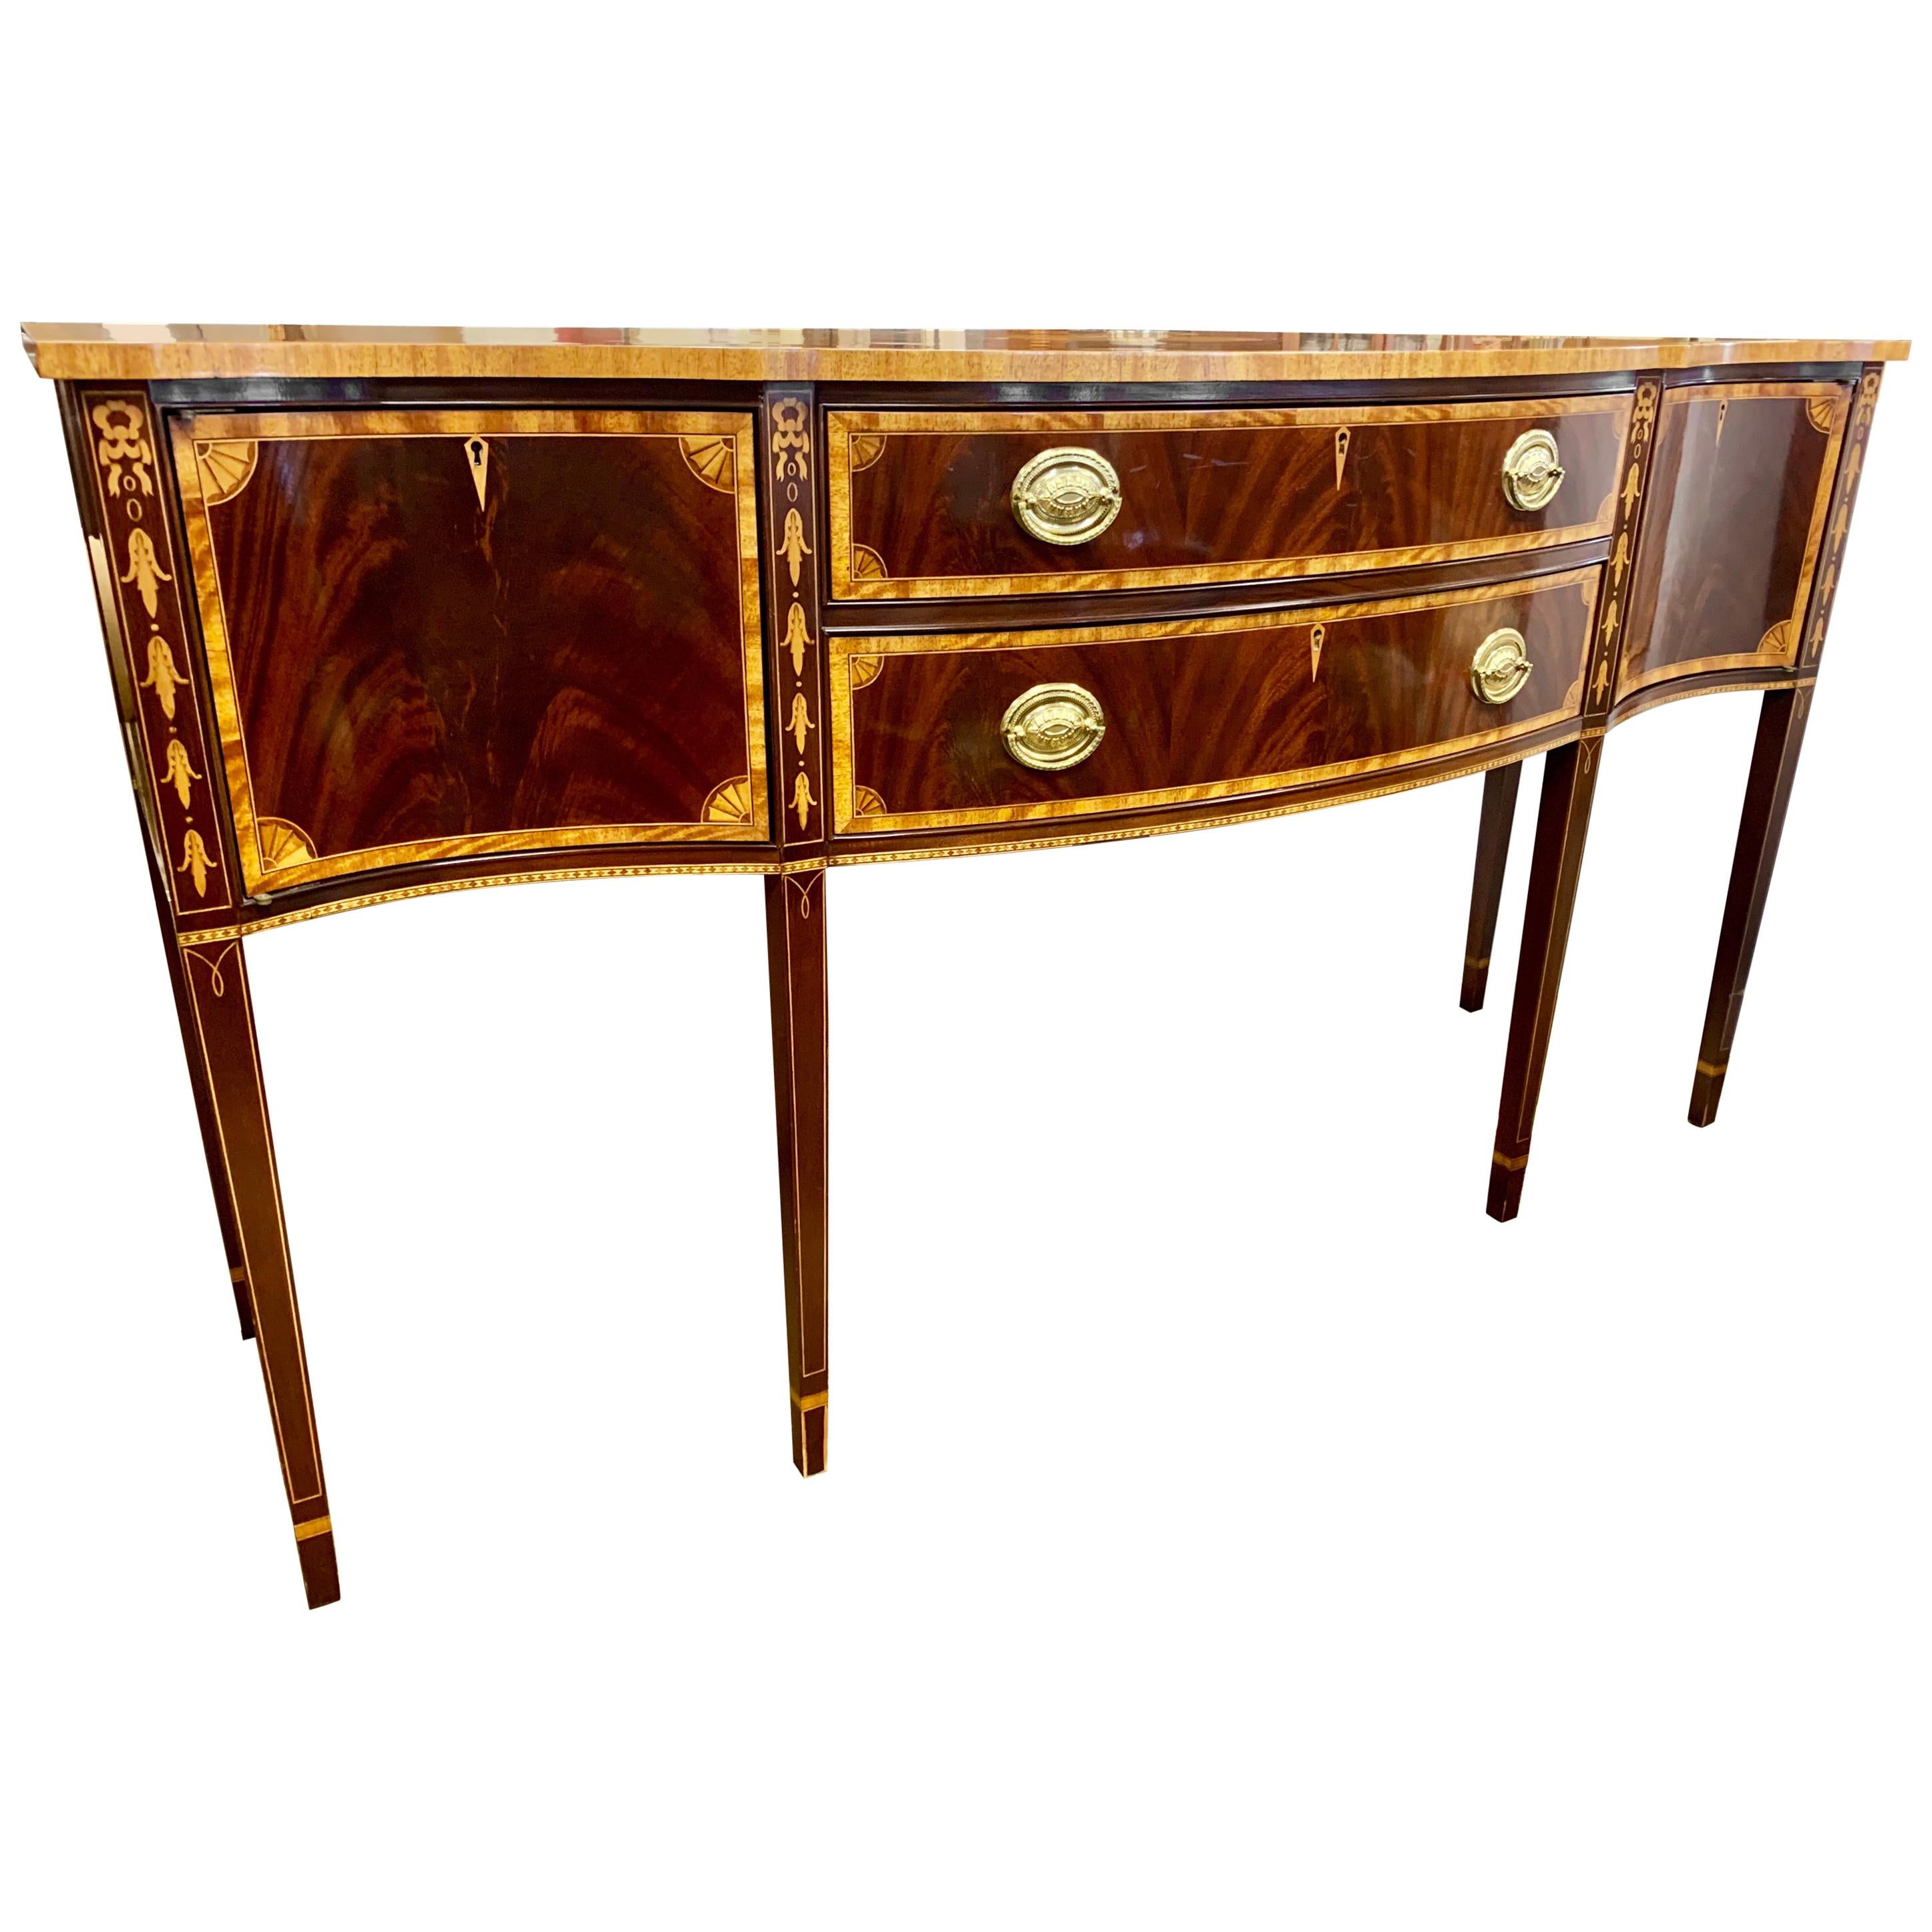 Councill Craftsman Furniture Mahogany Inlay and Brass Sideboard Buffet Server